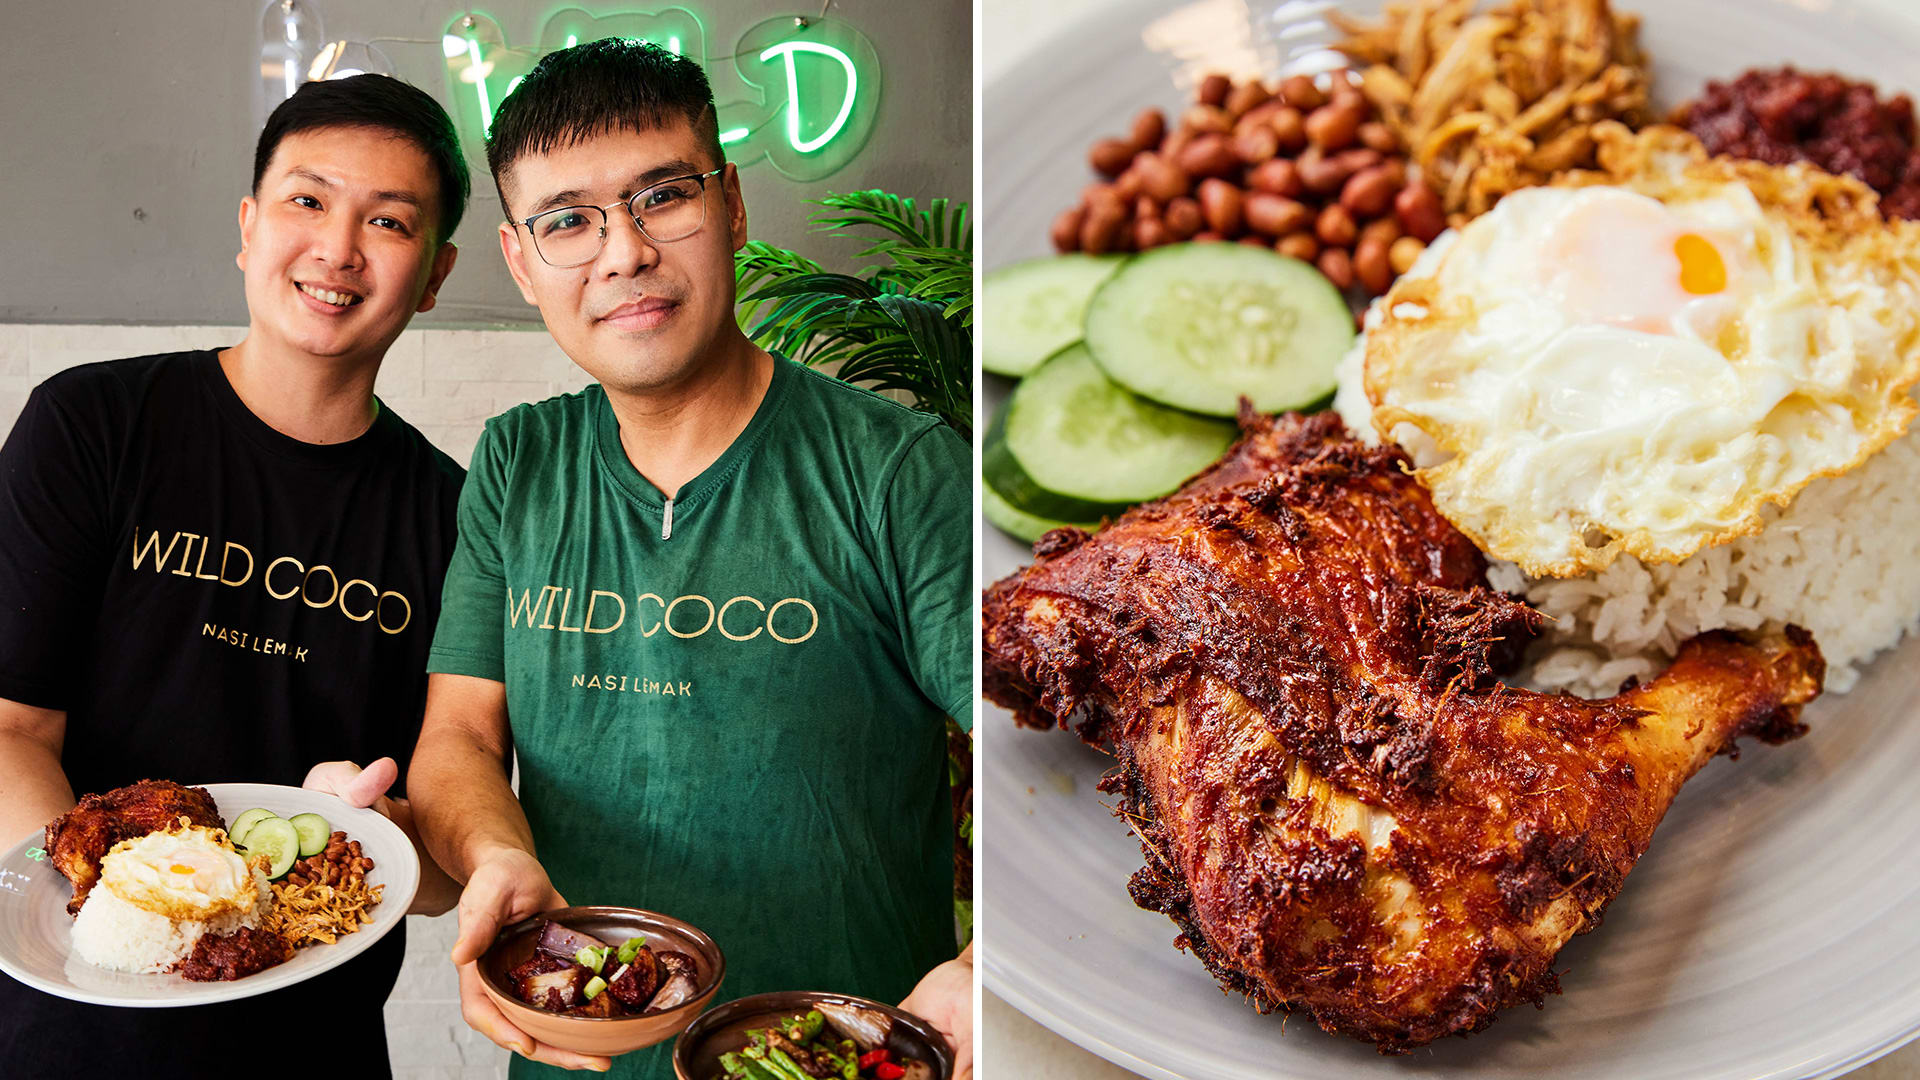 Hip Hawker Stall In Balestier Serves Nasi Lemak That Looks A Lot Like The Coconut Club’s